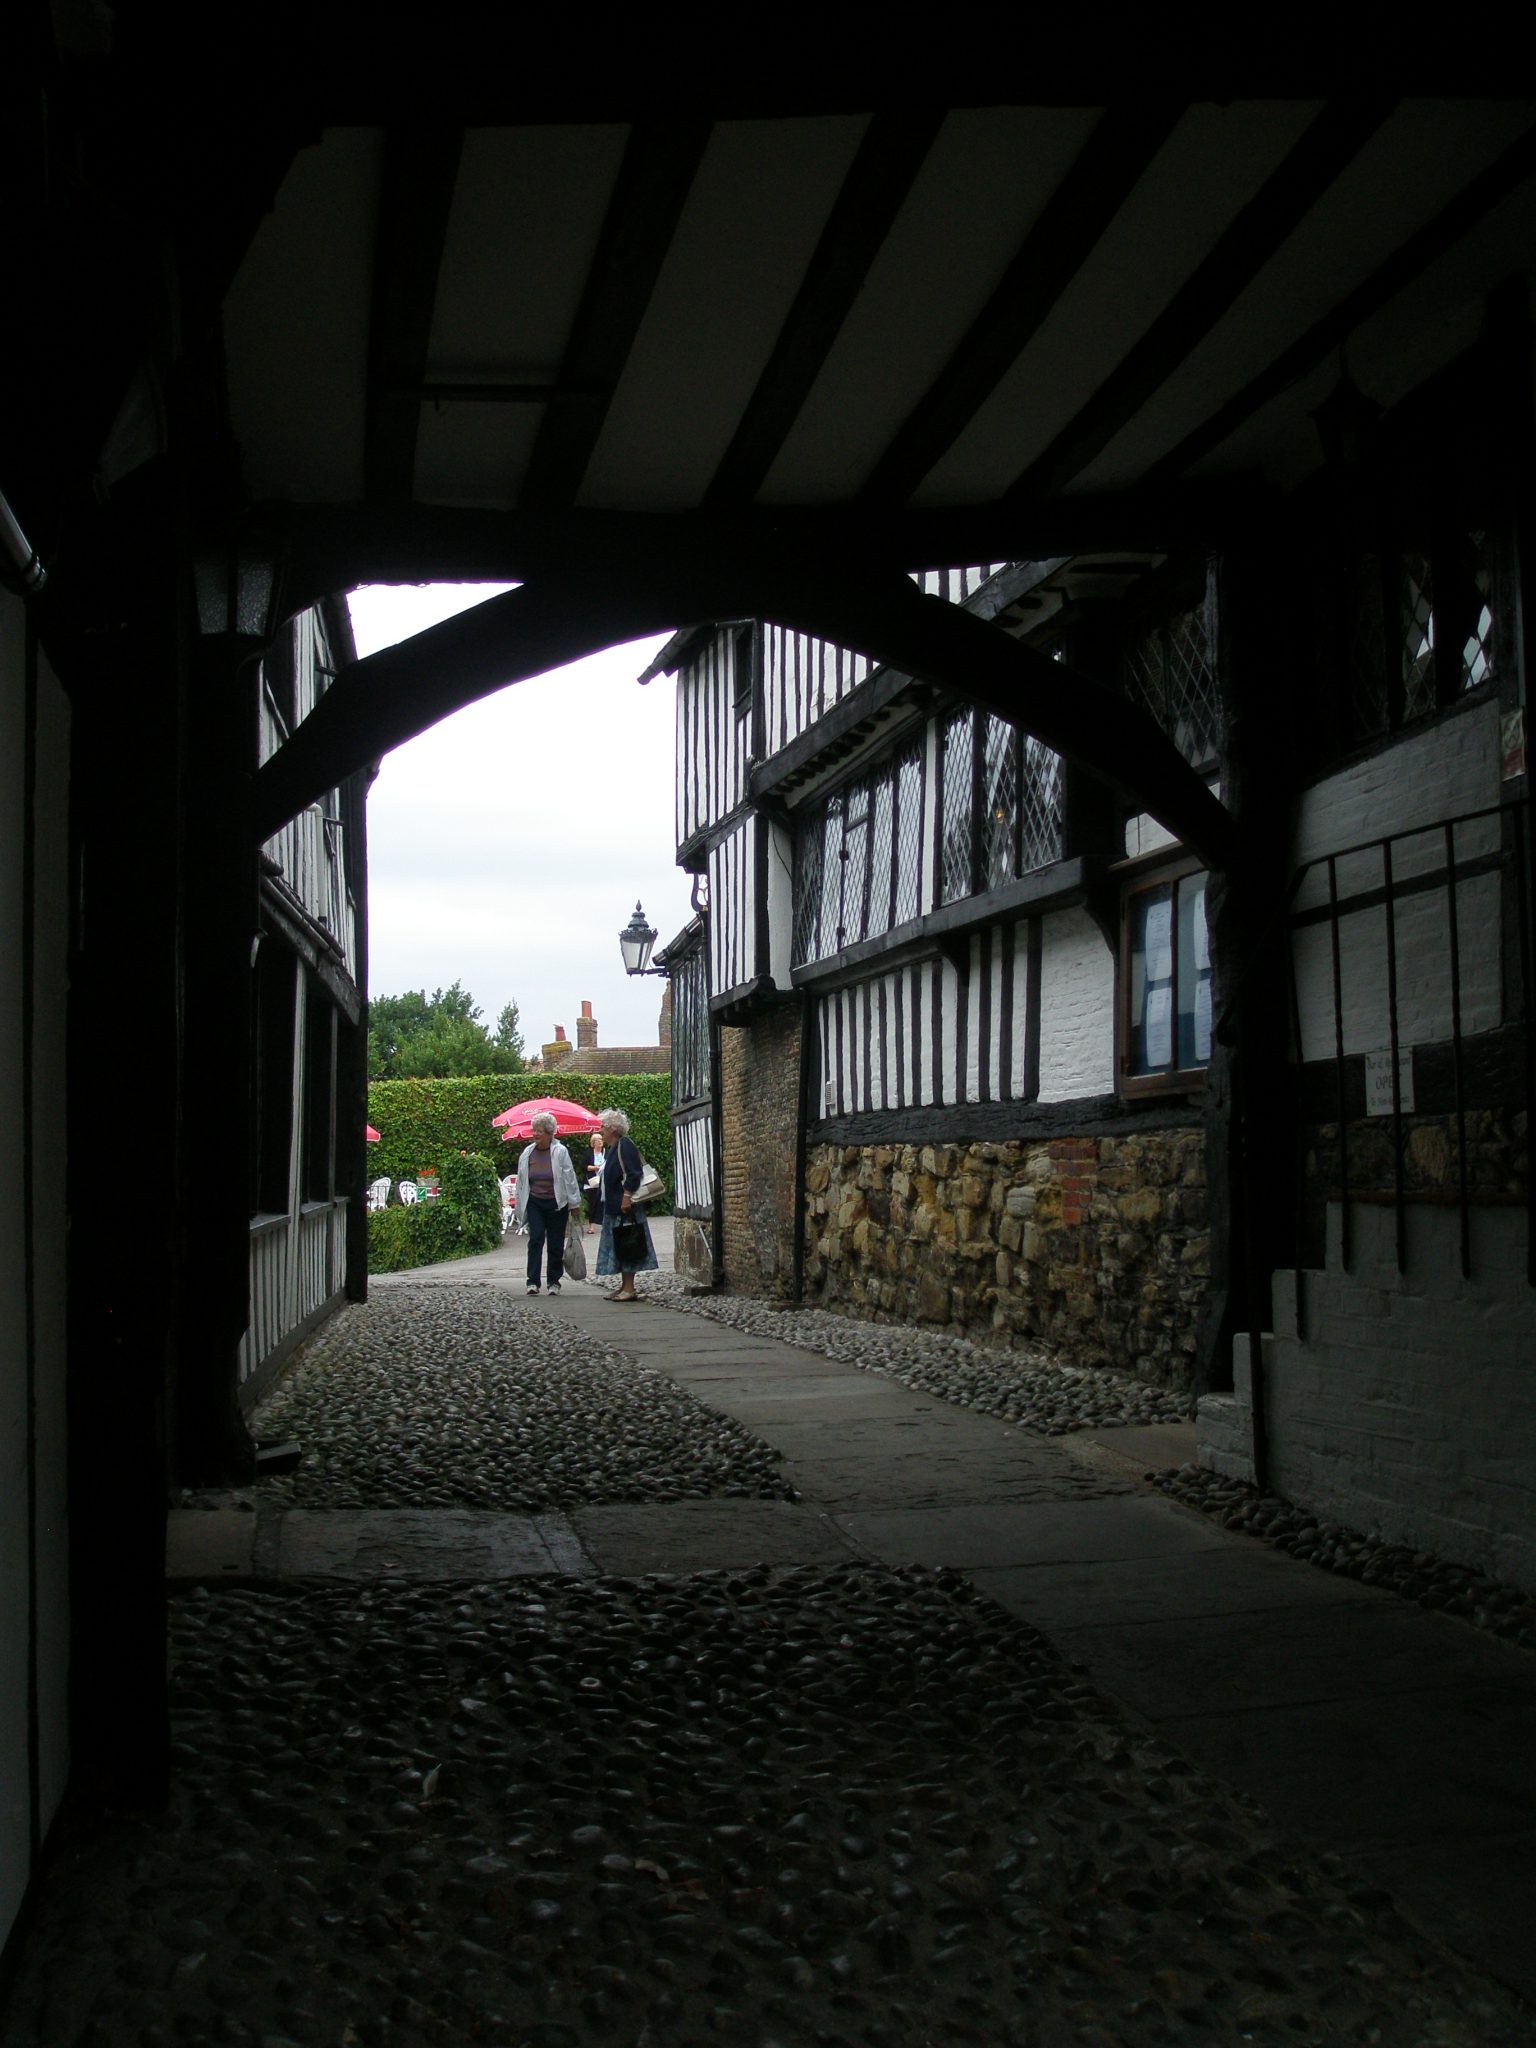 Passage leading to the Courtyard, at the Mermaid Inn.